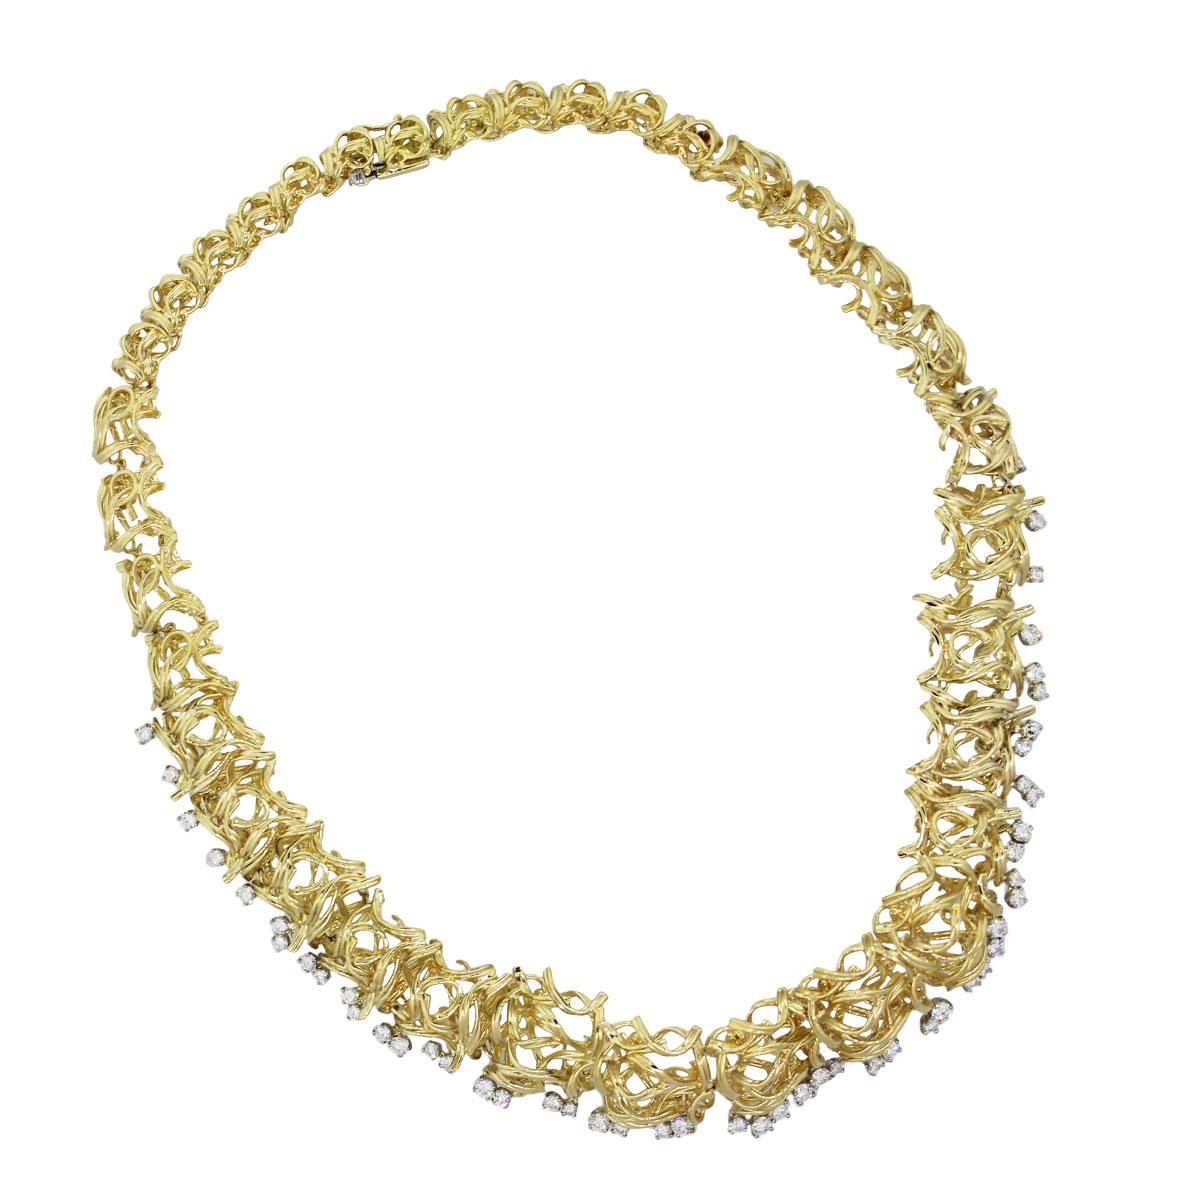 Material: 18k yellow gold
Diamond Details: Approximately 3ctw of round brilliant diamonds. Diamonds are G/H in color and VS in clarity
Necklace Measurements: 18″
Fastening: Double tongue box clasp with safety latch
Item Weight: 129.5g